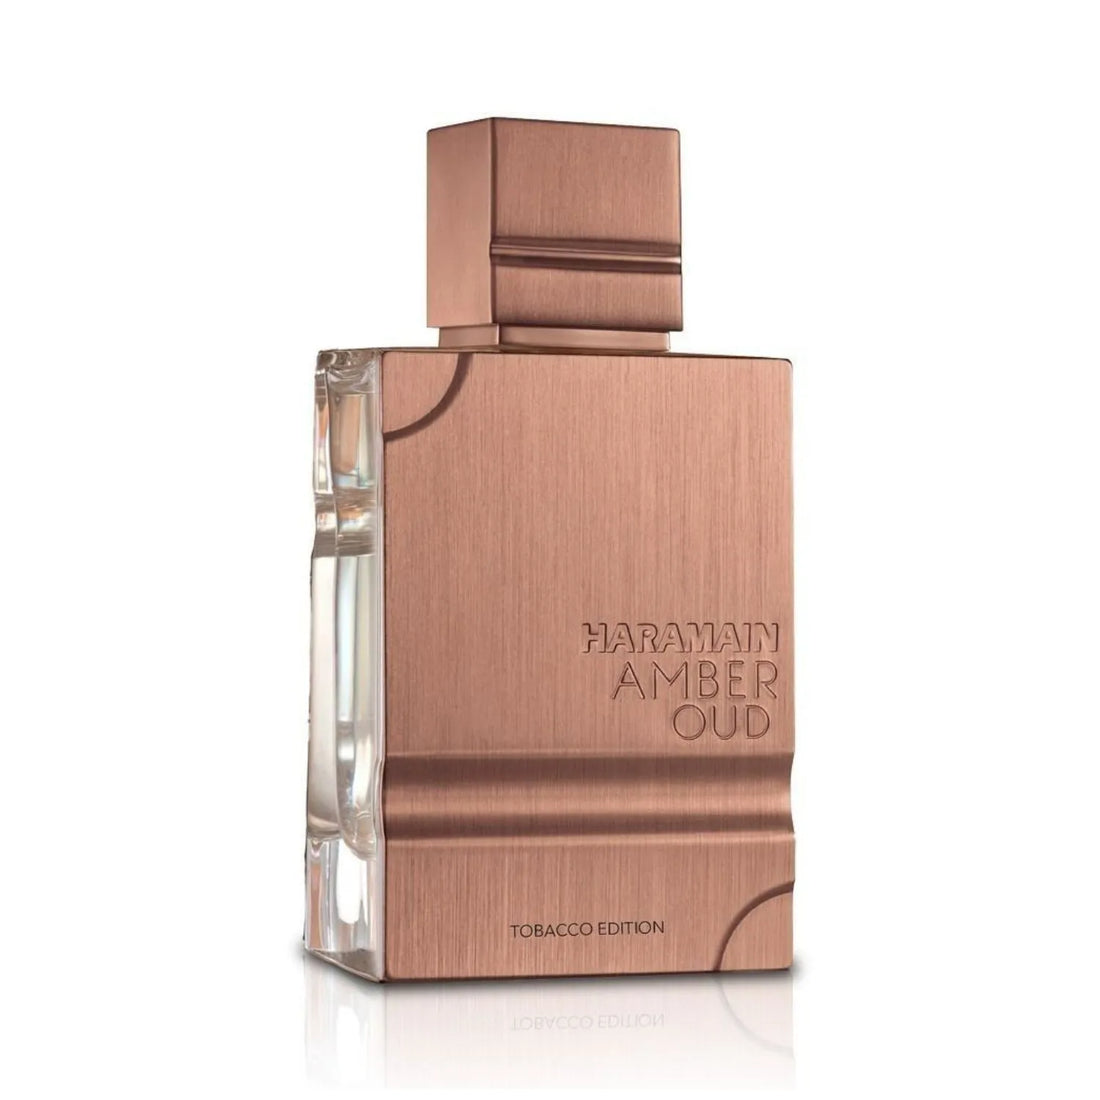 Amber Oud Tobacco Edition Perfume Bottle